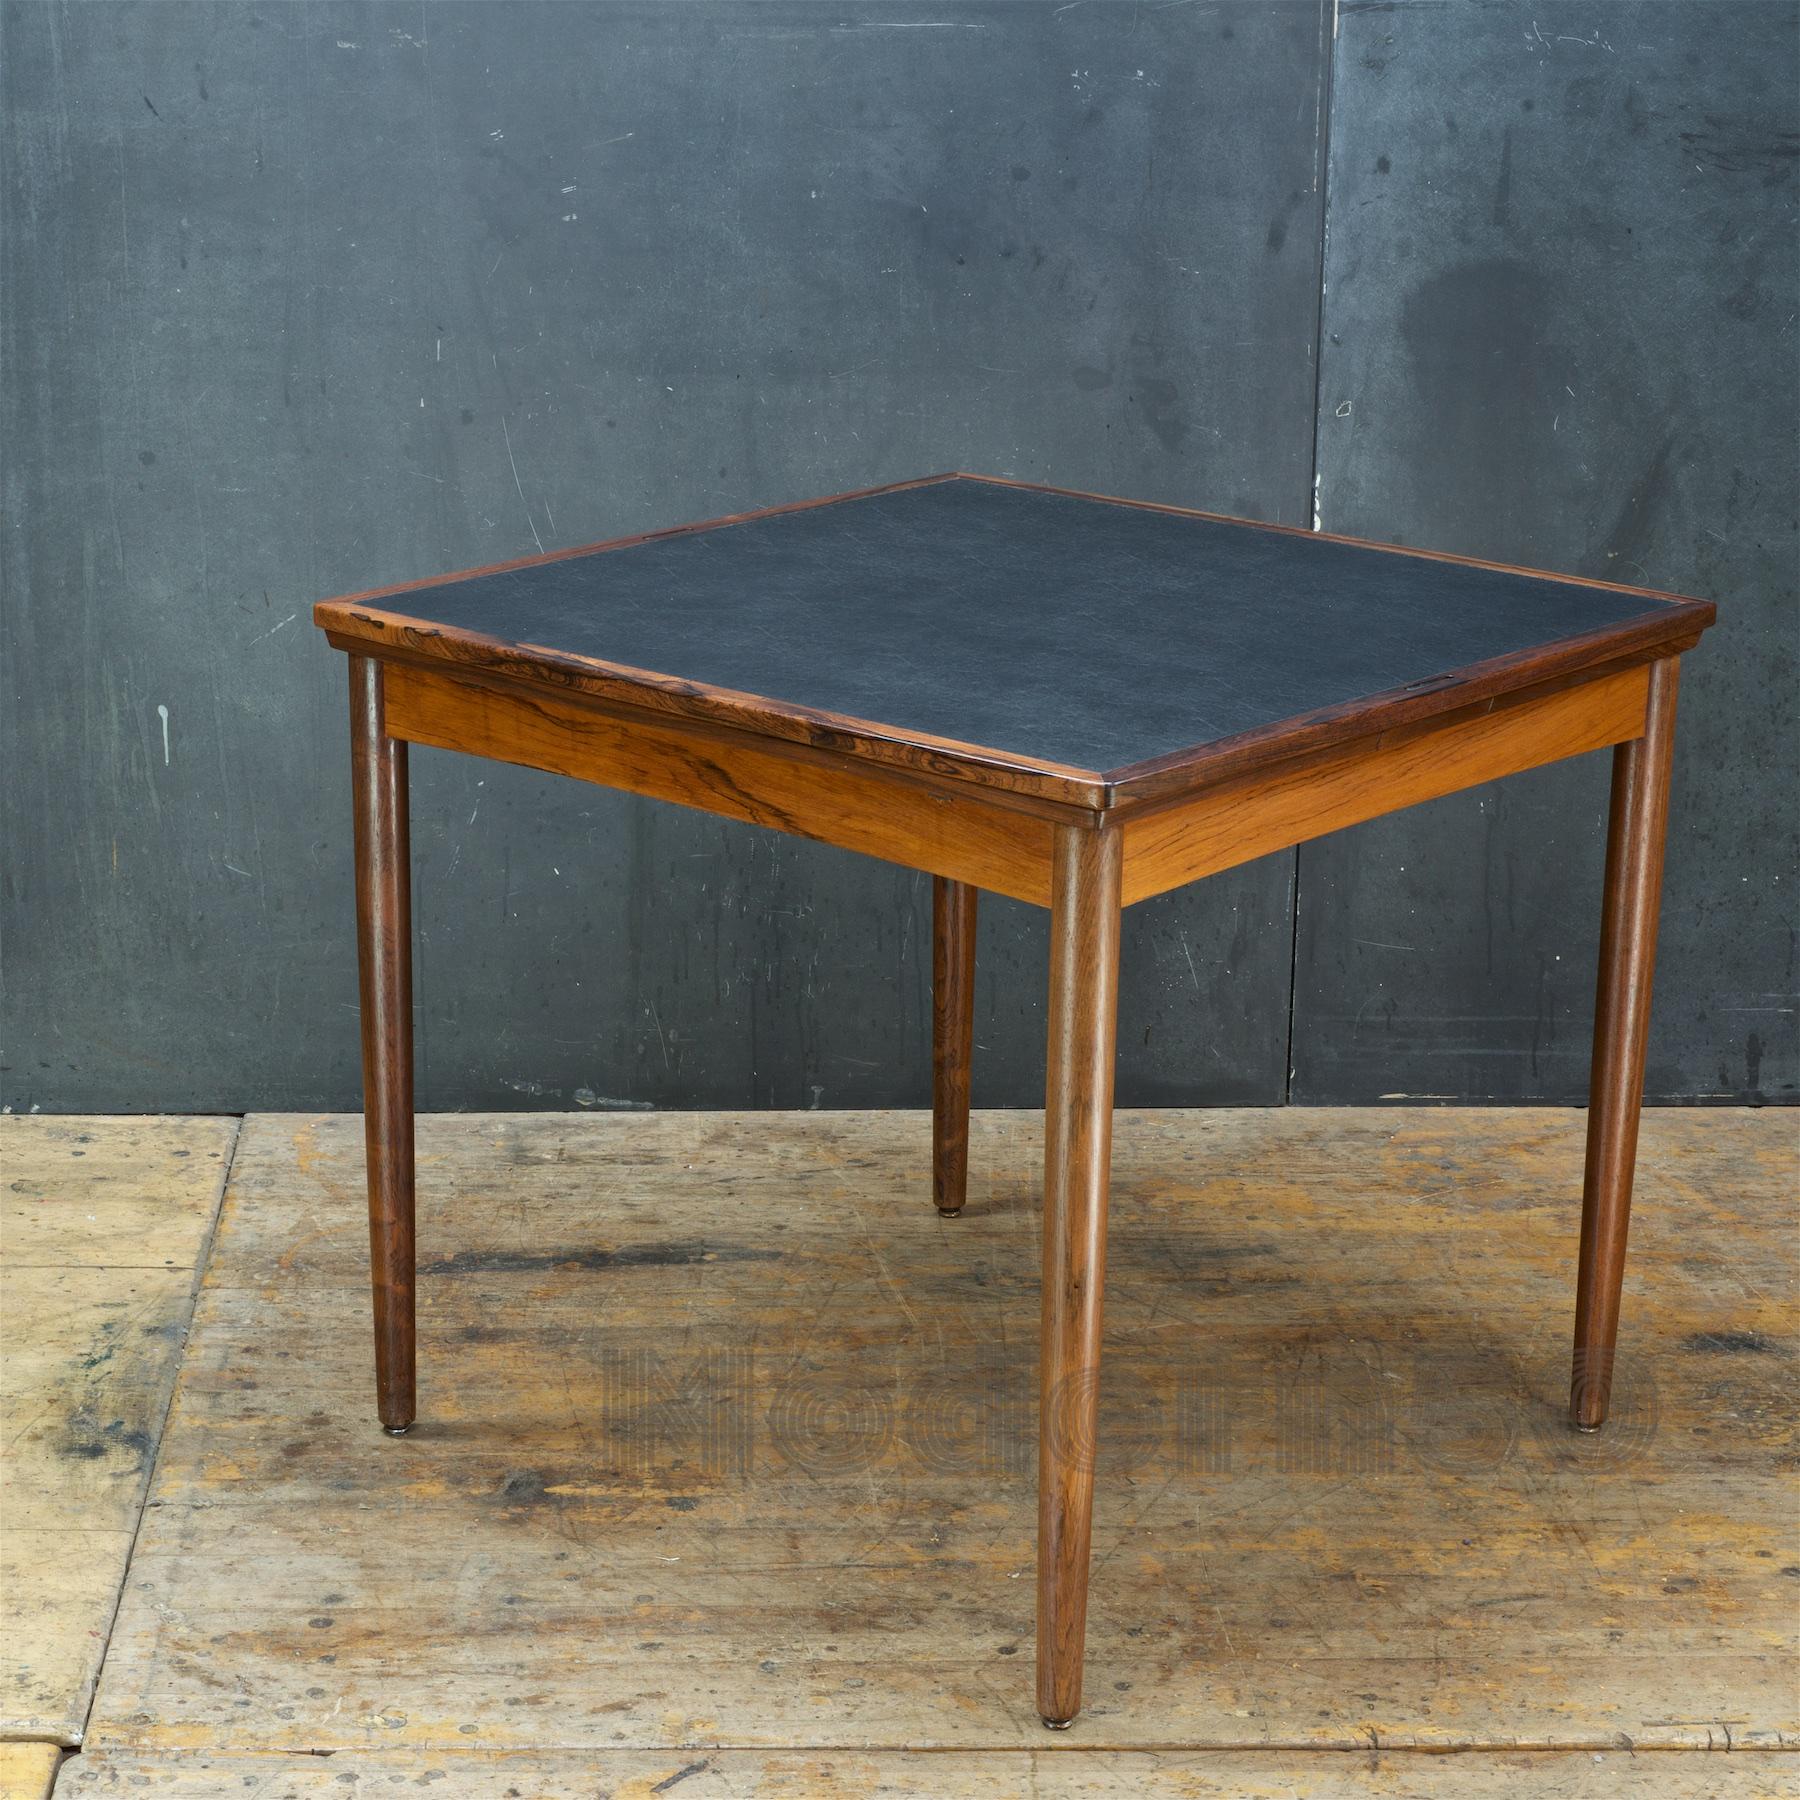 1960s Brazilian Rosewood Compact Danish Dining Table Midcentury Maximalist Apt In Fair Condition In Hyattsville, MD